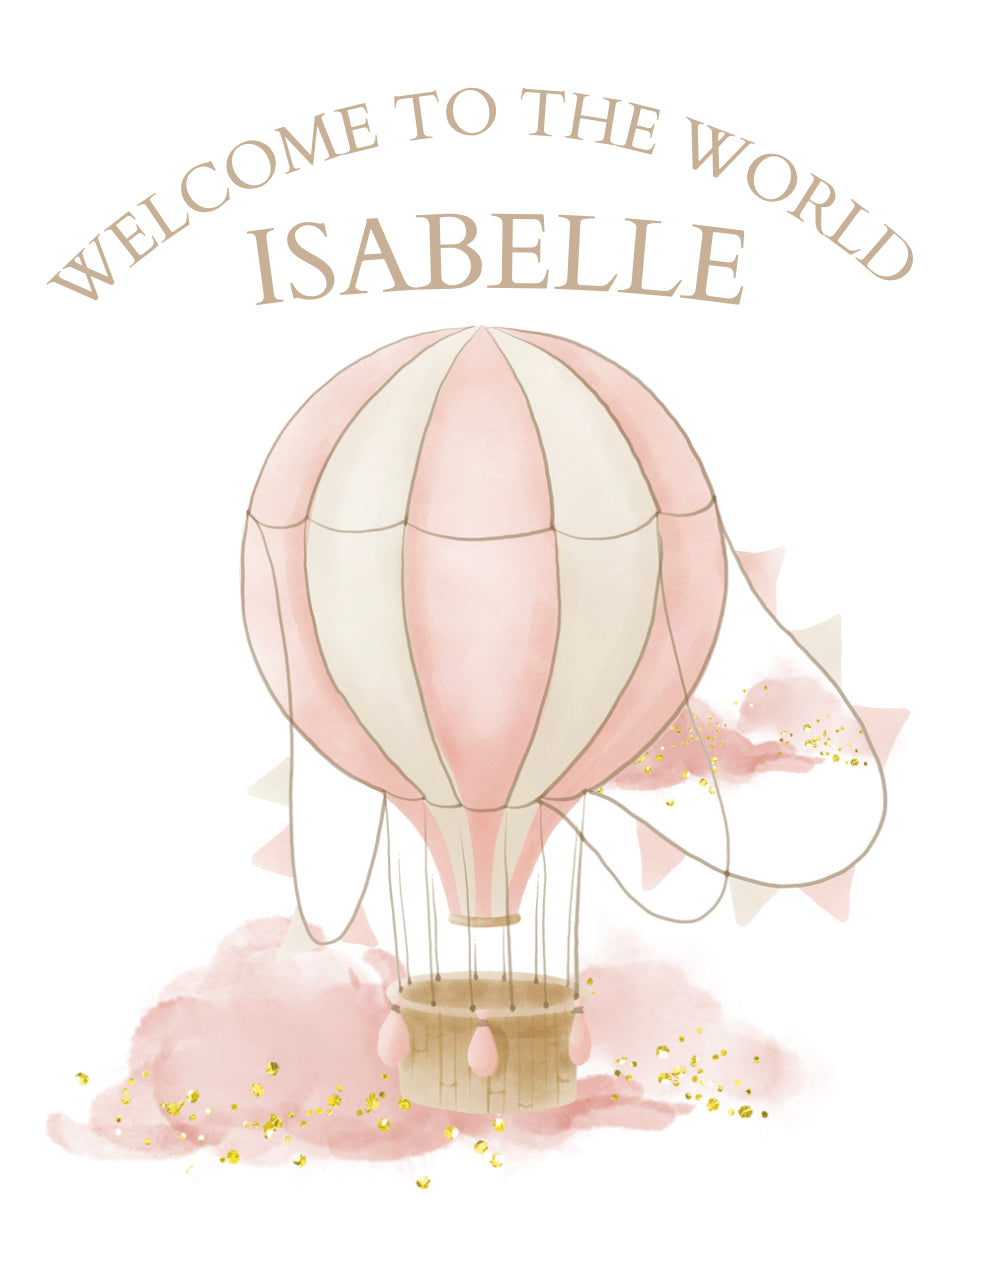 Personalised New Baby Girl Sleepsuit. Welcome to the World Hot Air Balloon